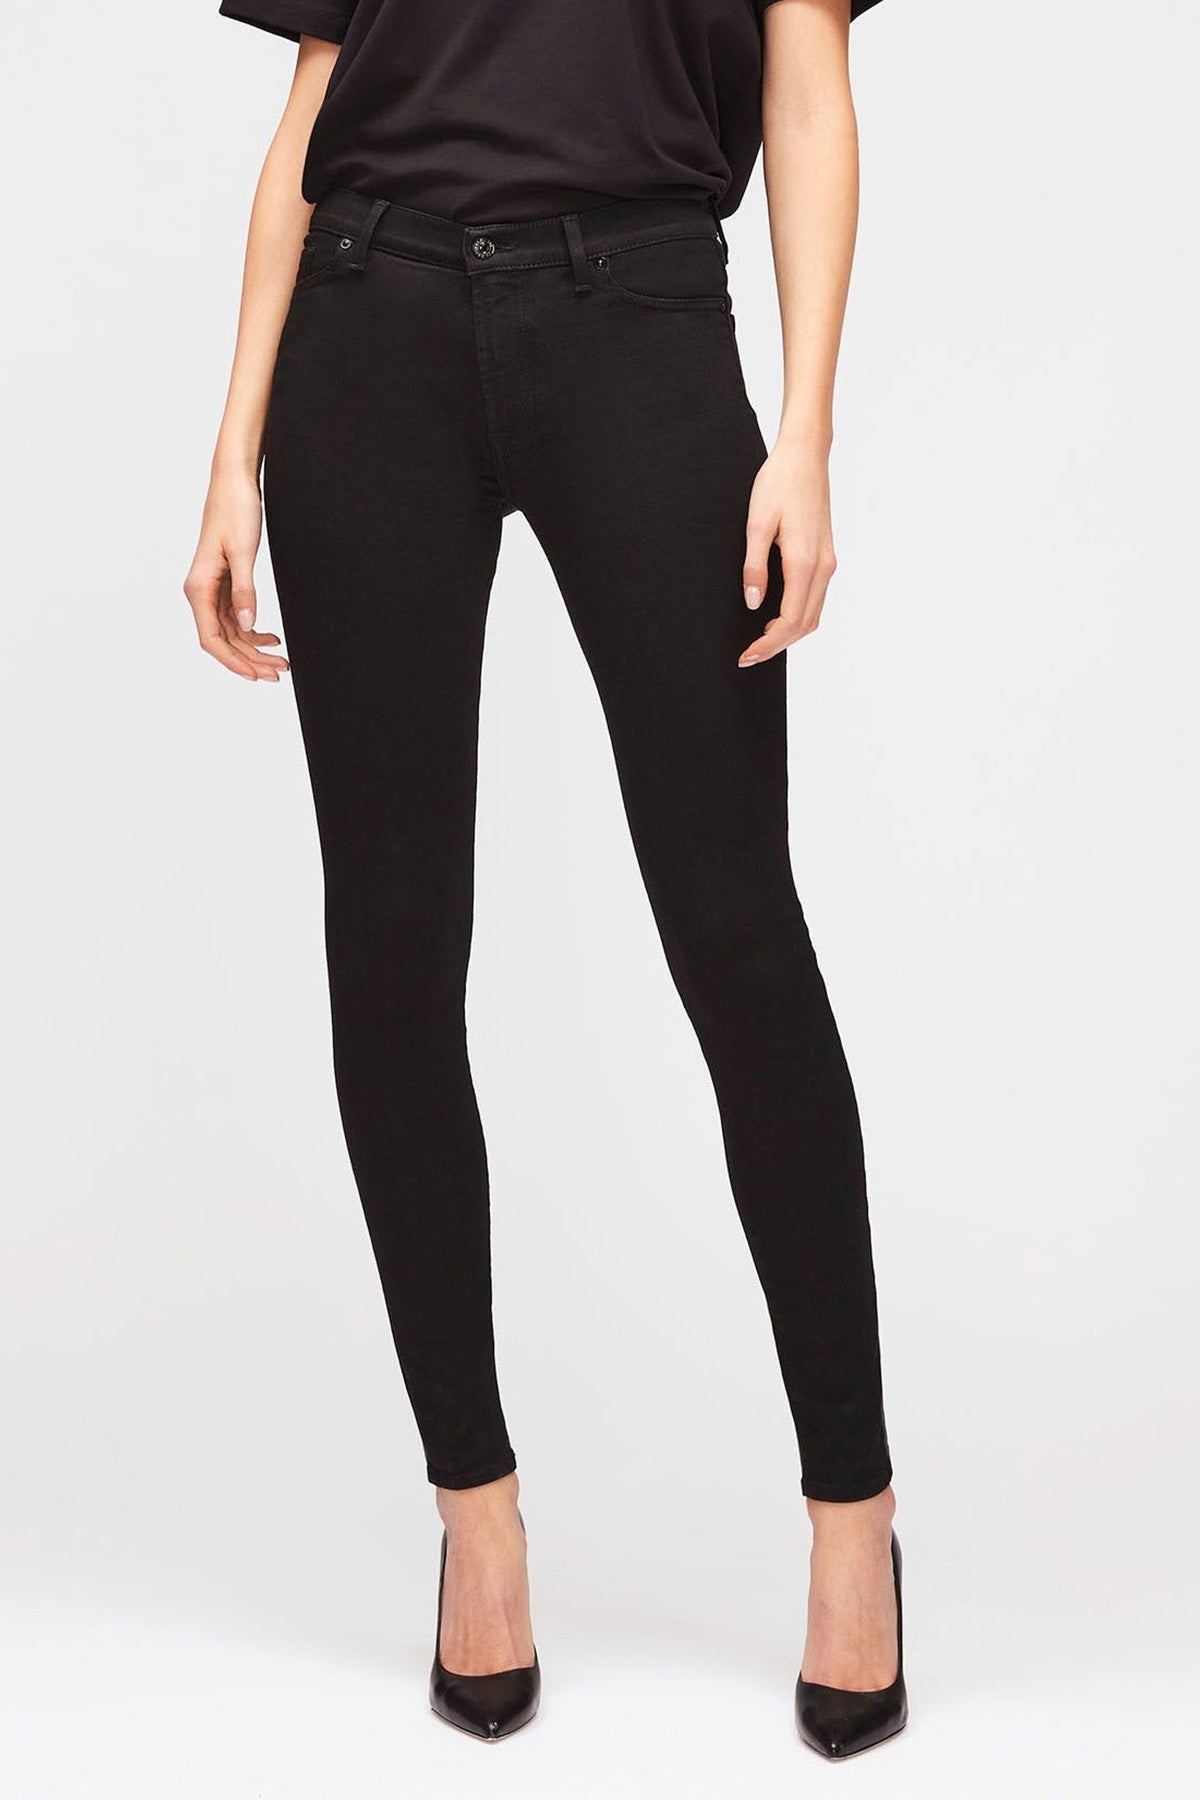 7 For All Mankind Rinsed Skinny Fit Streç Jeans